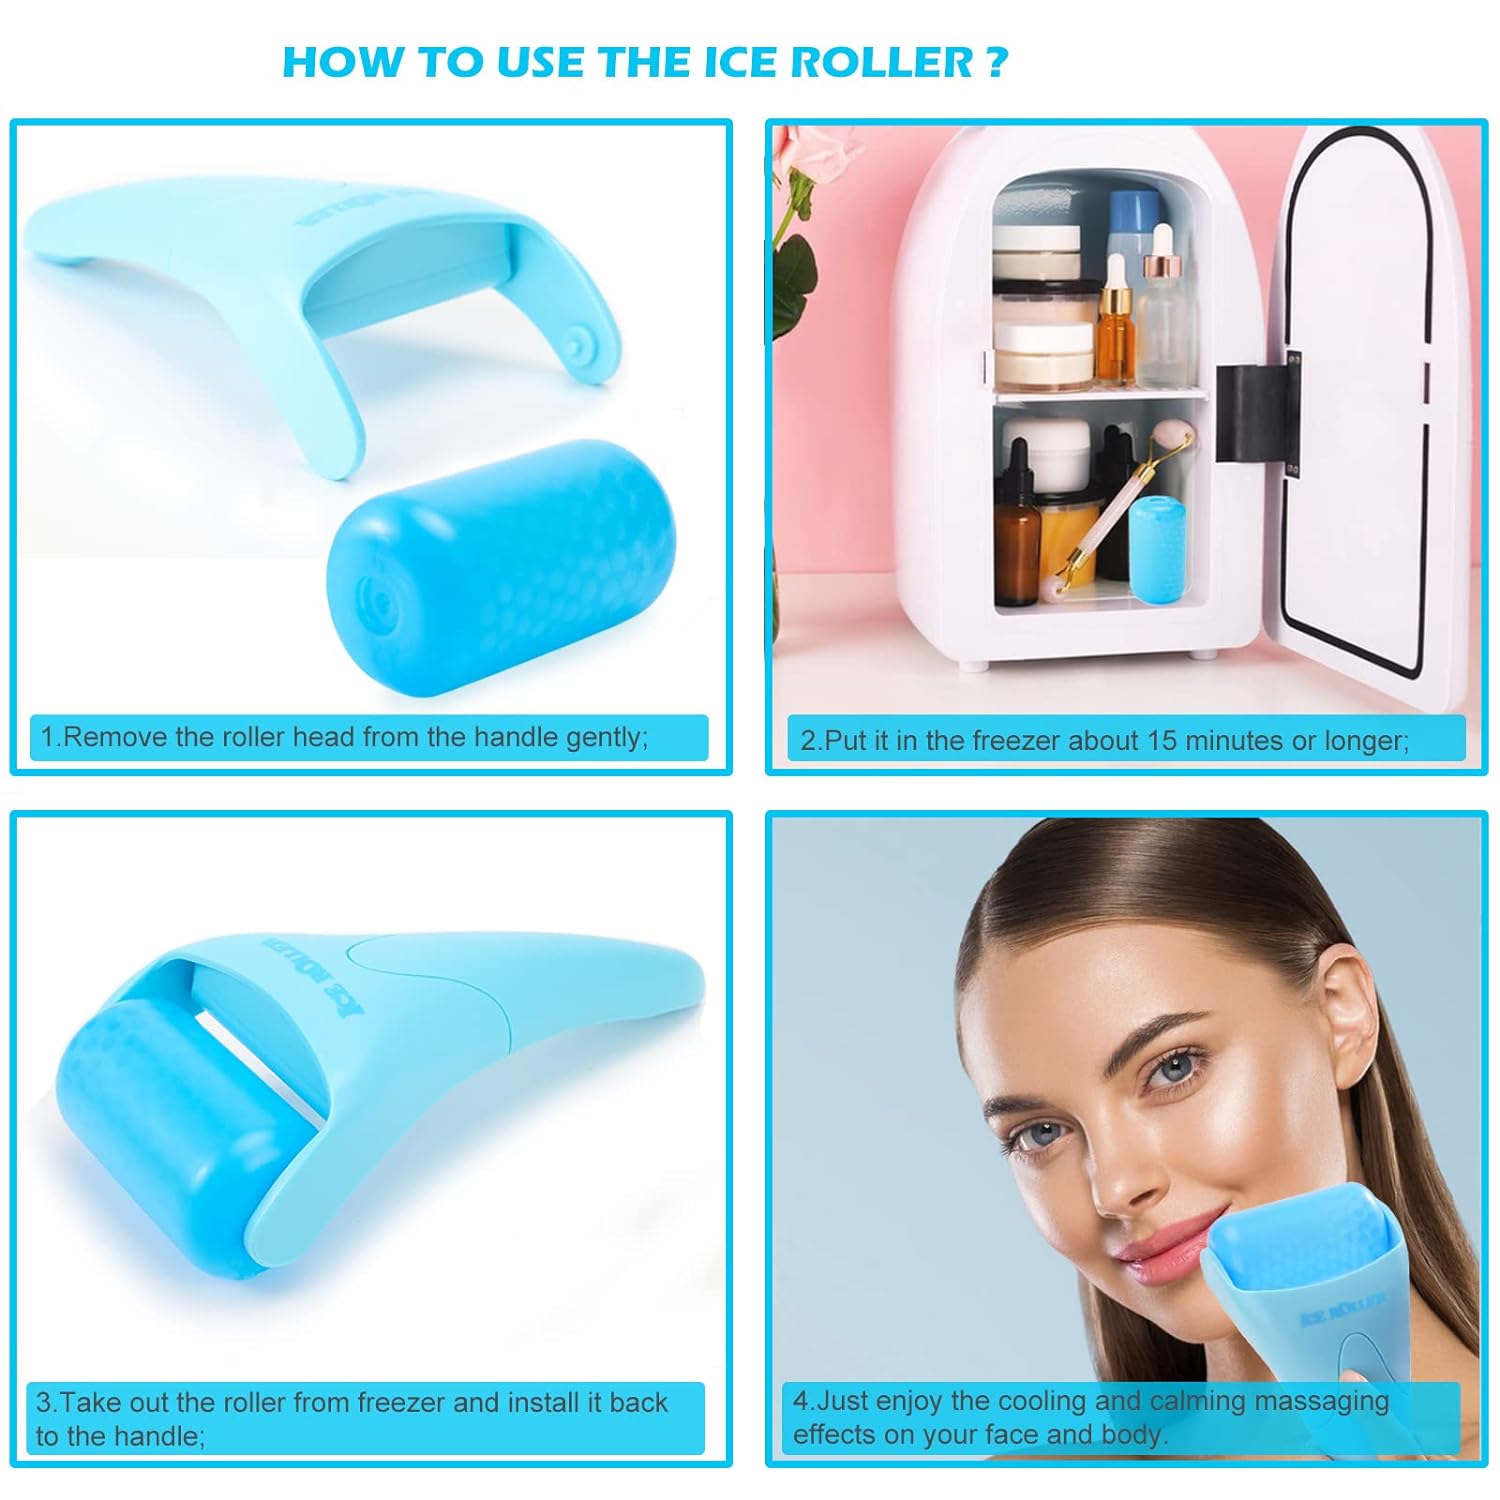 Wholesale prices with free shipping all over United States 2 PACK Ice Roller for Face and Body Massage, Facial Roller Skin Care Tool for Reduce Wrinkles and Puffiness, Migraine Pain Relief and Skin Tighten, Cold Therapy for Cooling and Calming.(Pink+Green) - Steven Deals